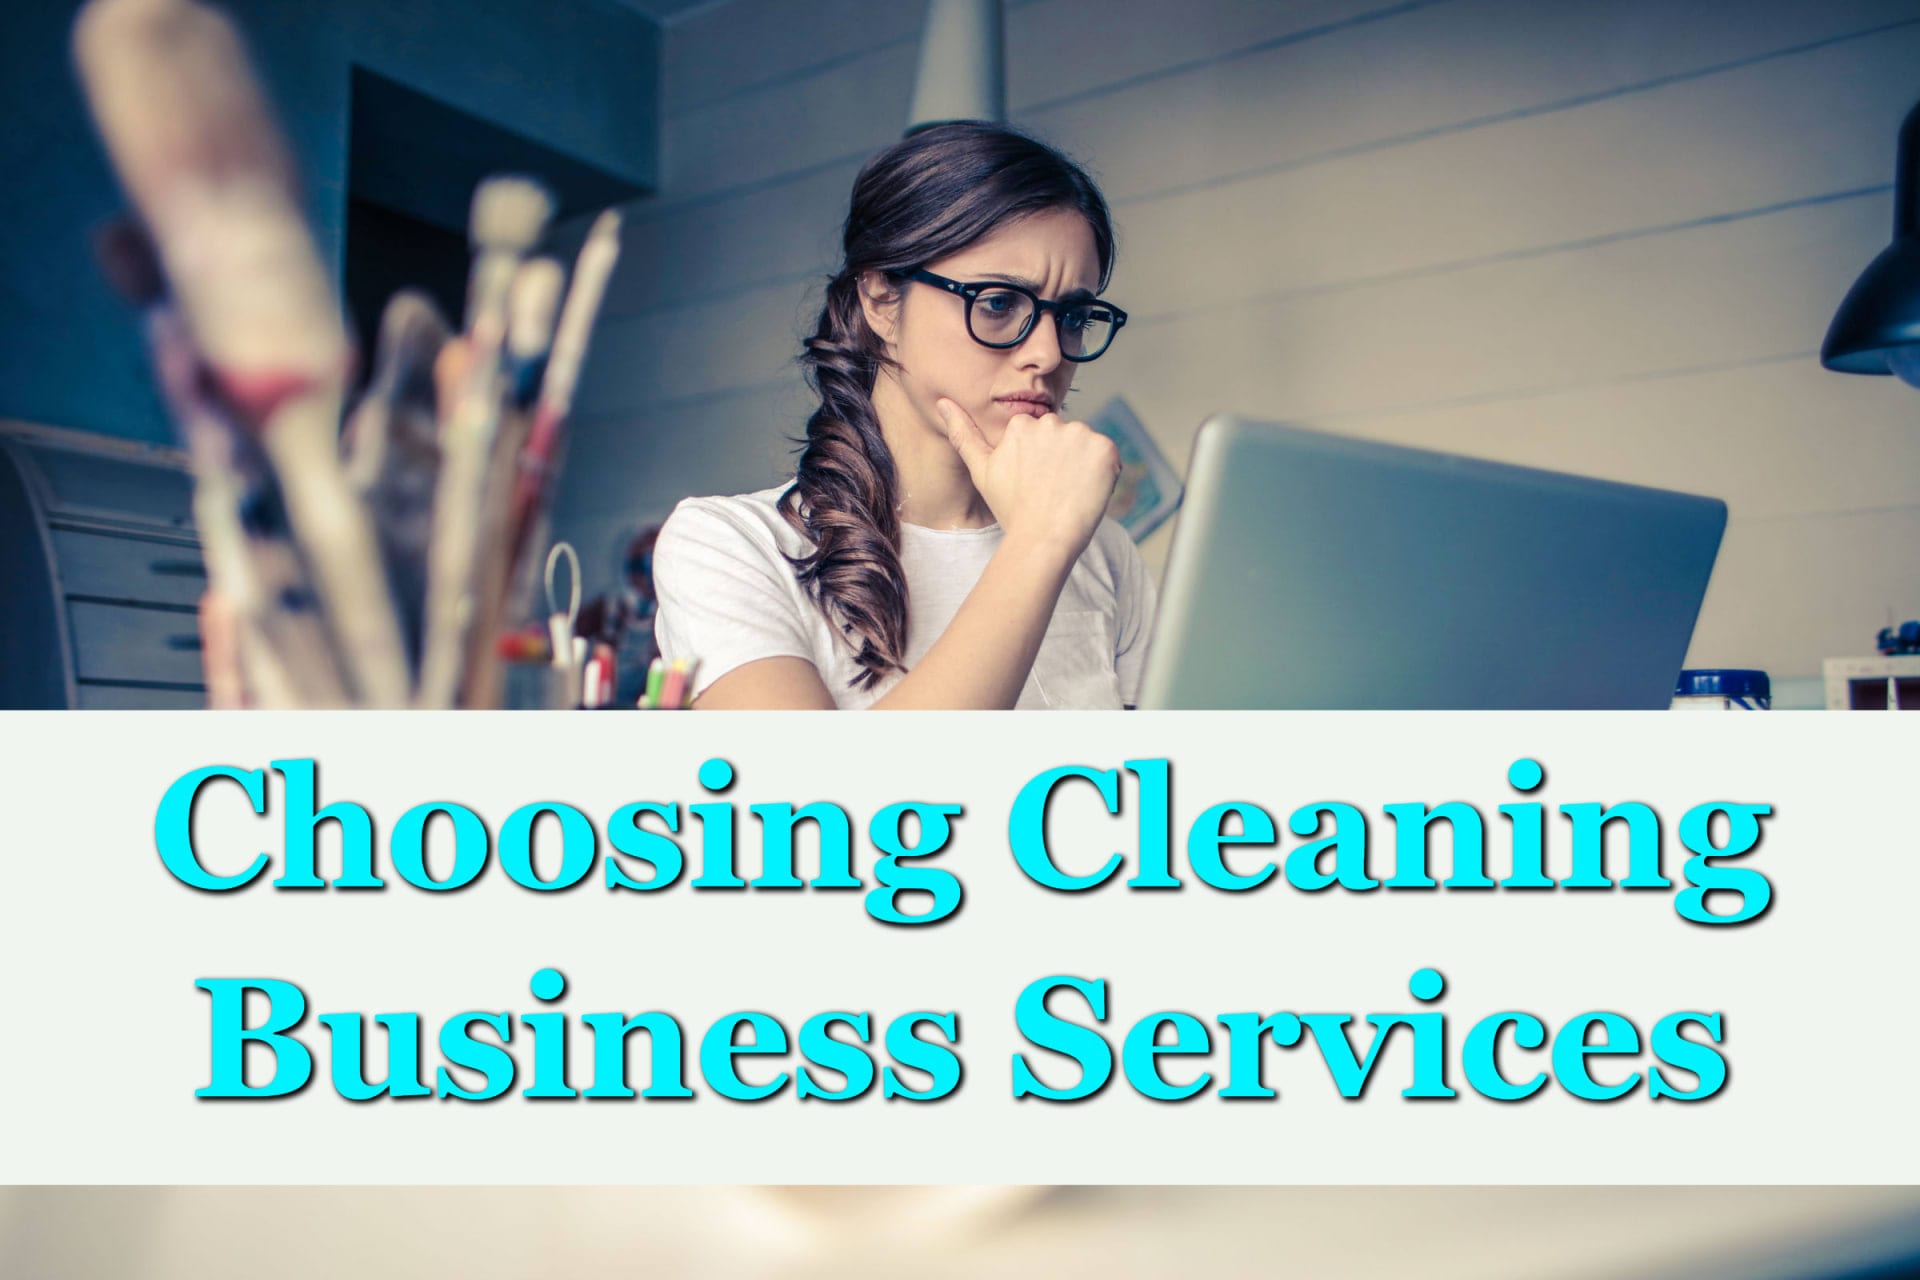 Selecting and Providing Cleaning and Business Services Like a Pro